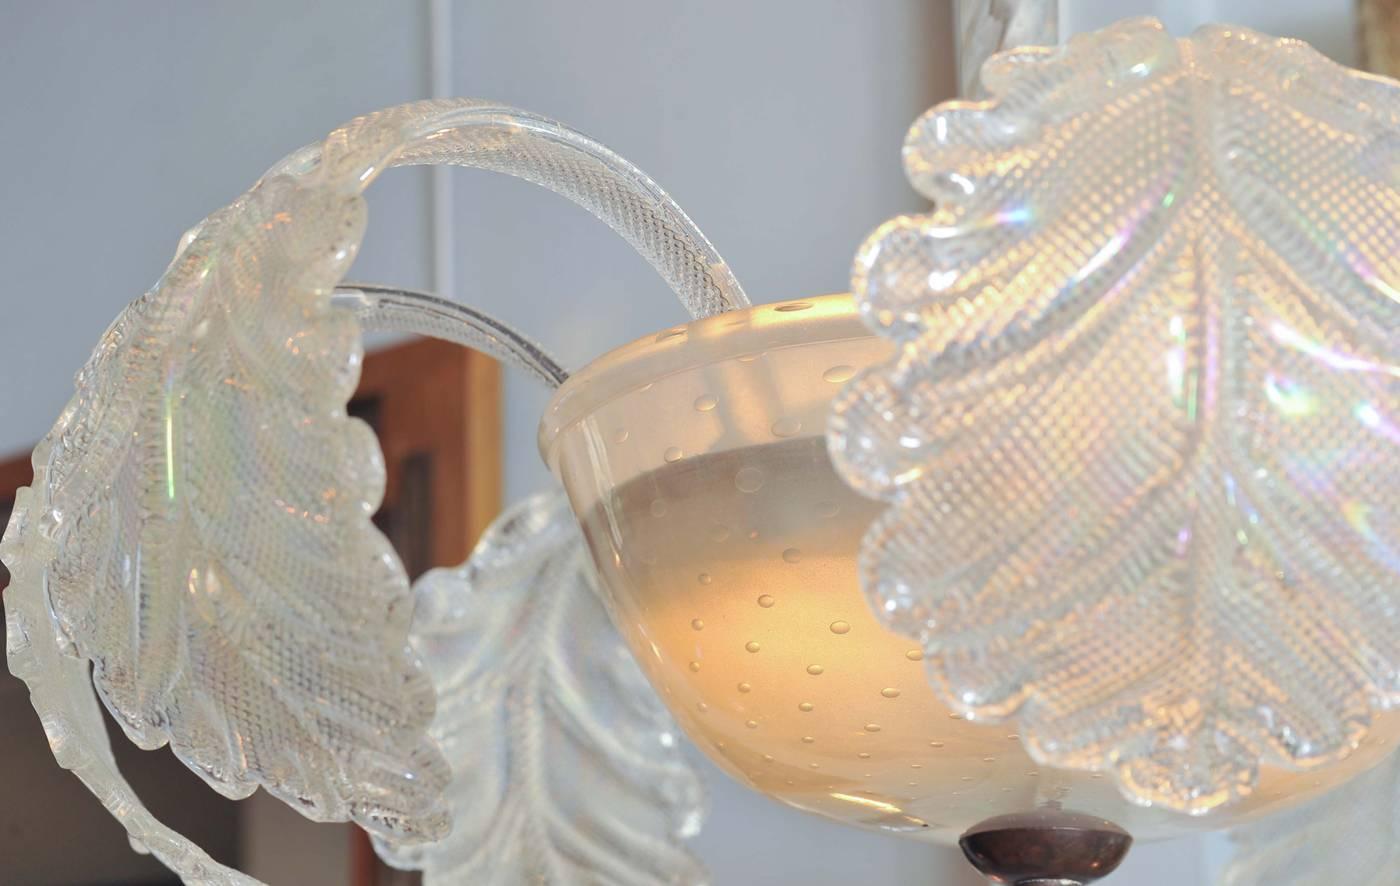 Delicate Murano glass chandelier with 'leaf' motifs springing from a glass basin, held by a 'rope twist' glass support, and finished off by an elegant glass droplet.